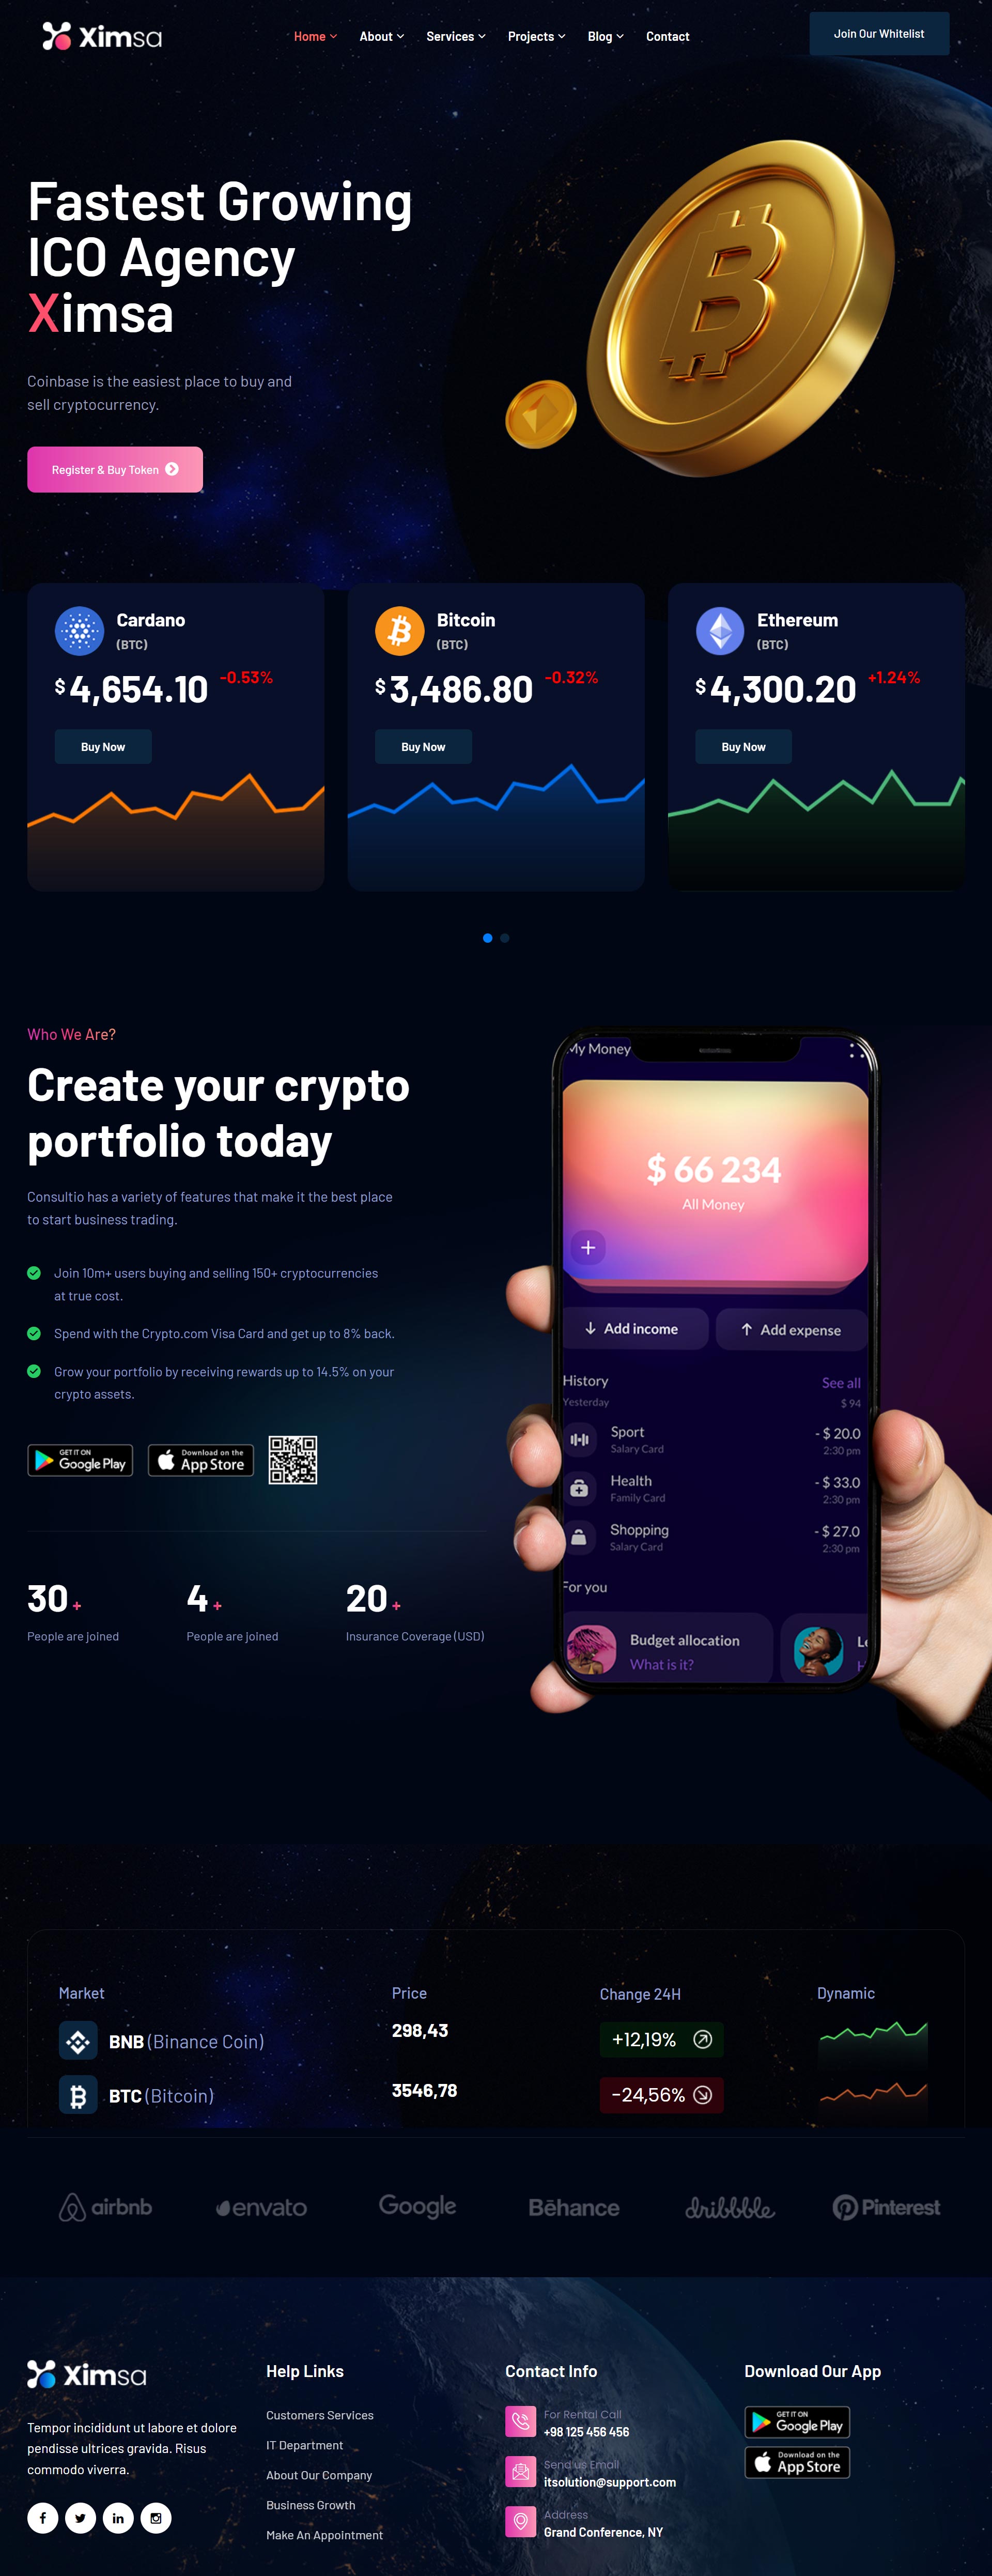 Crypto Currency Website Design